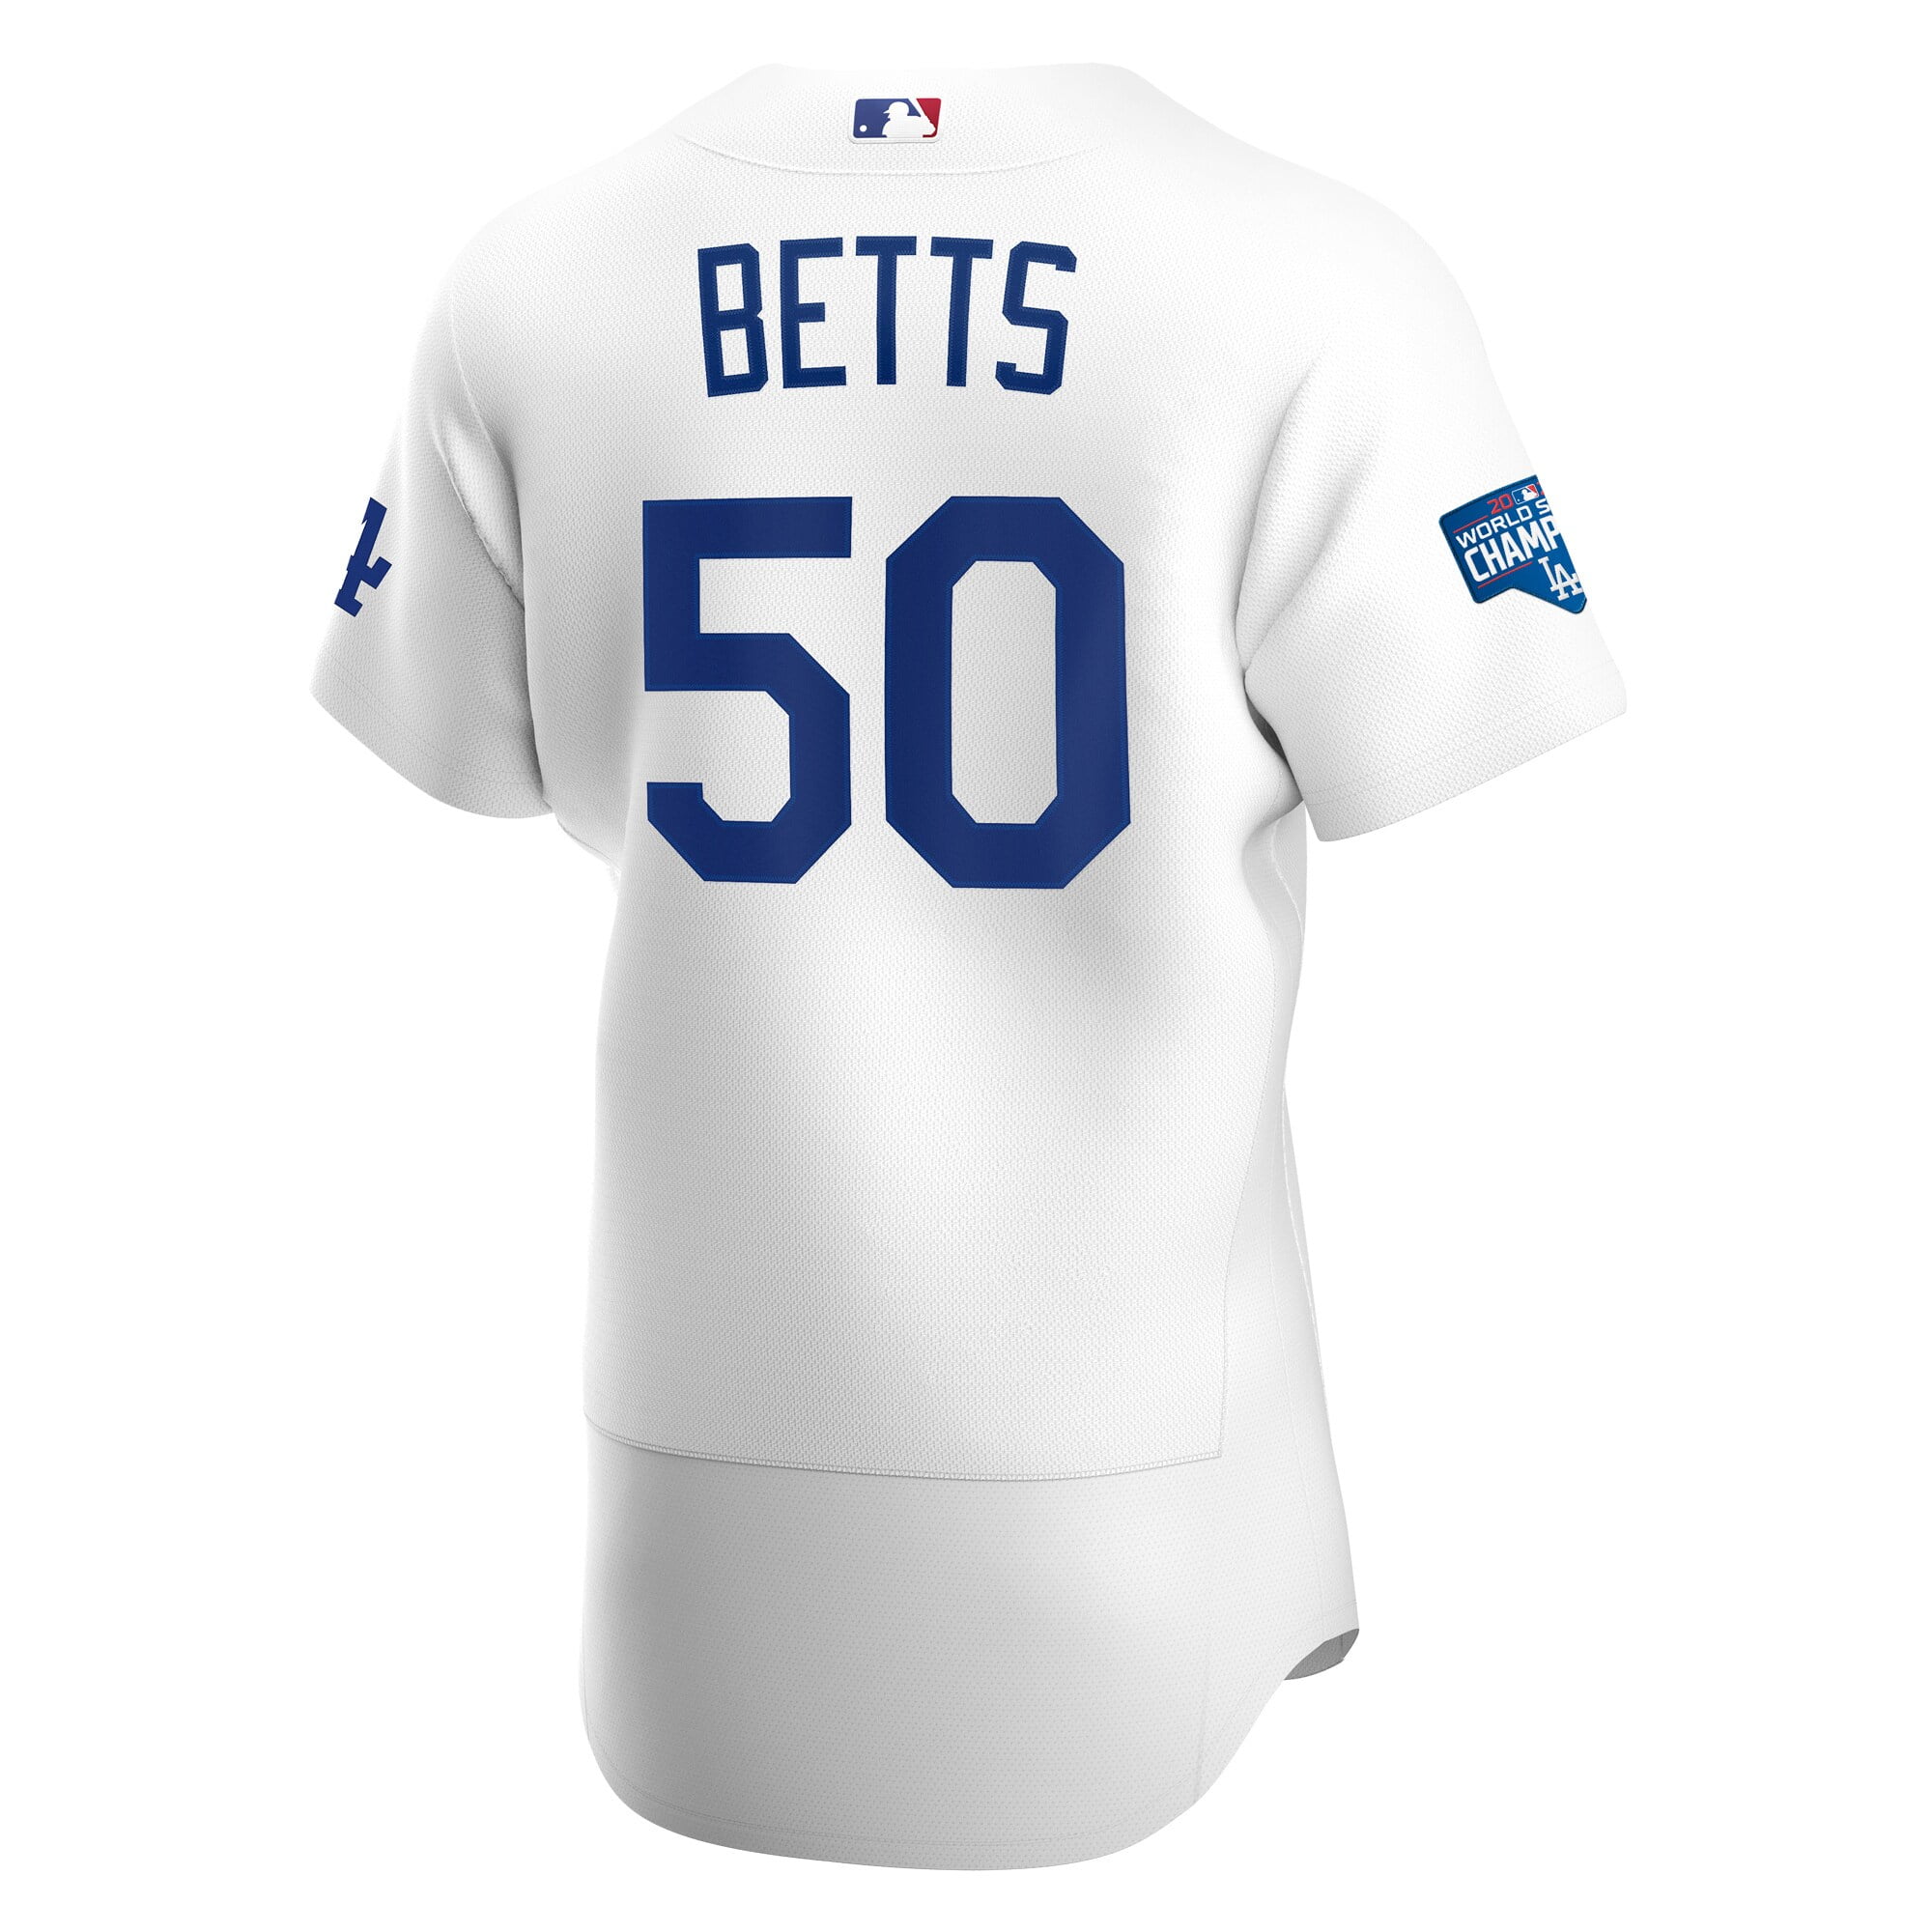 mookie betts authentic jersey dodgers